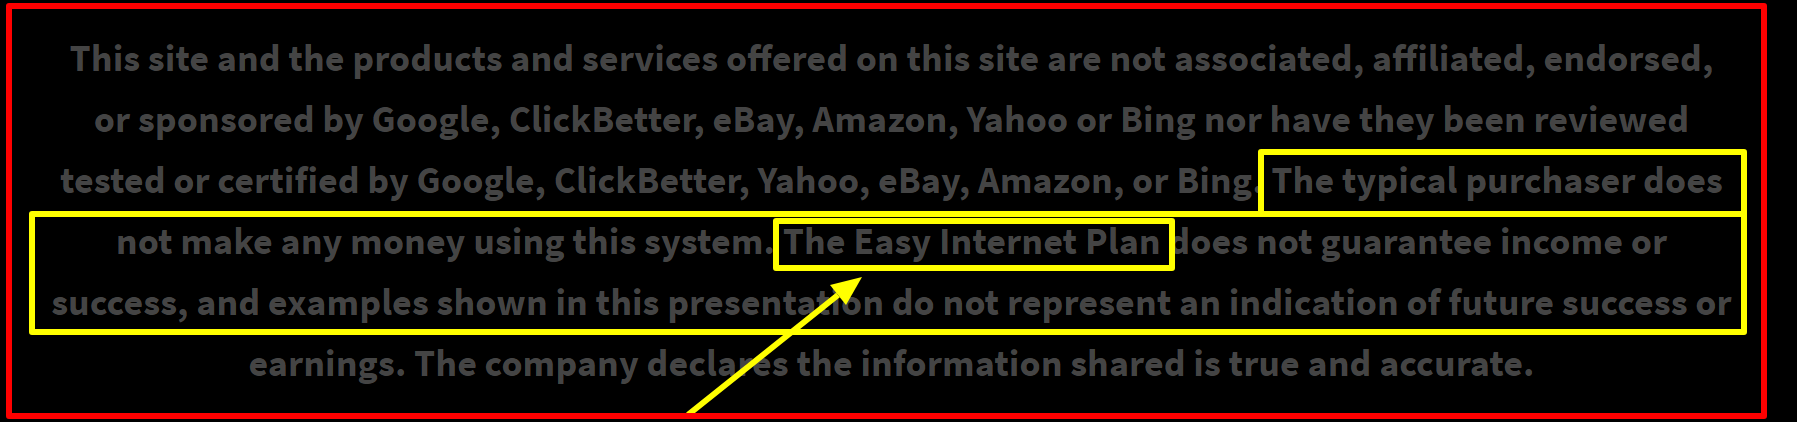 disclaimer of fast home sites